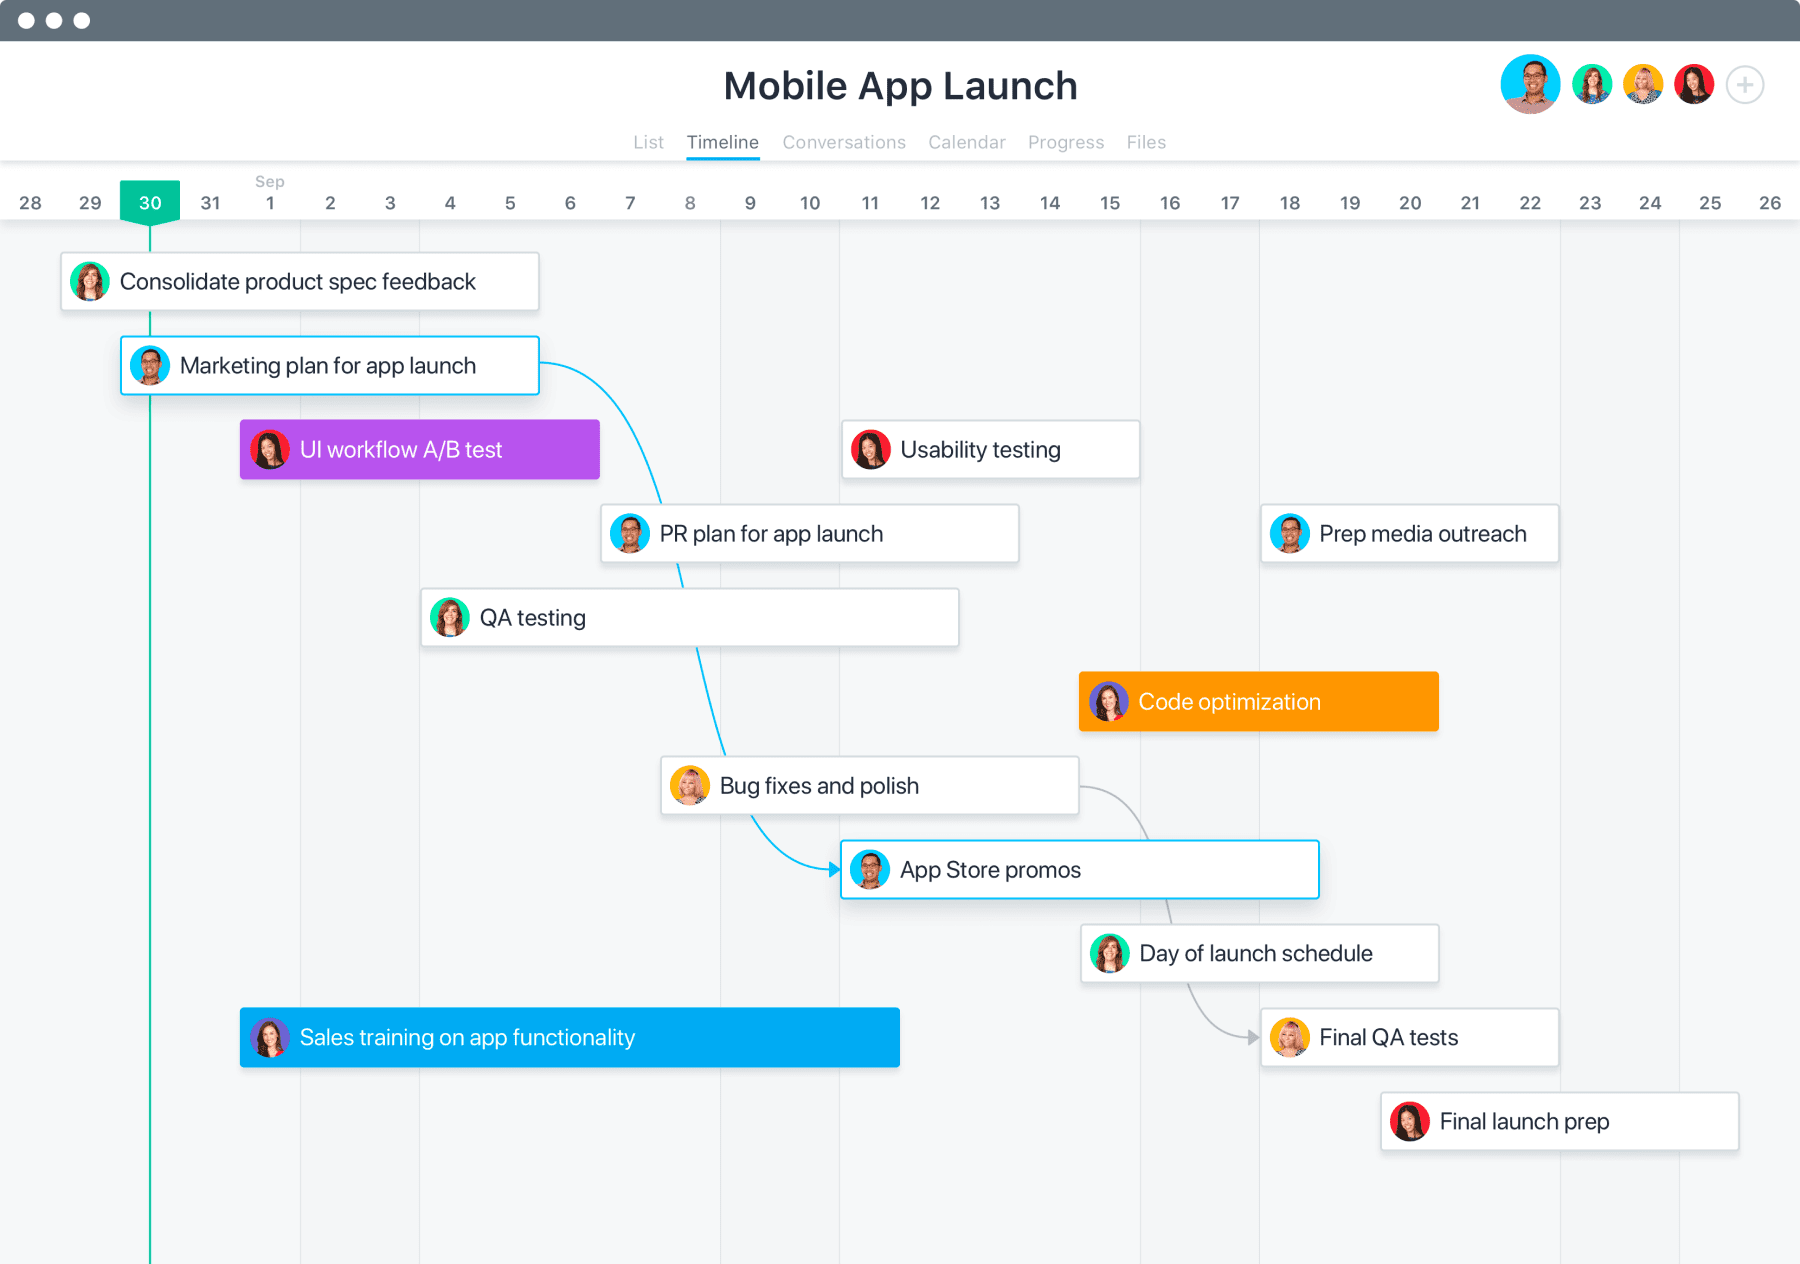 [Old Product UI] Mobile app launch (Timeline) 